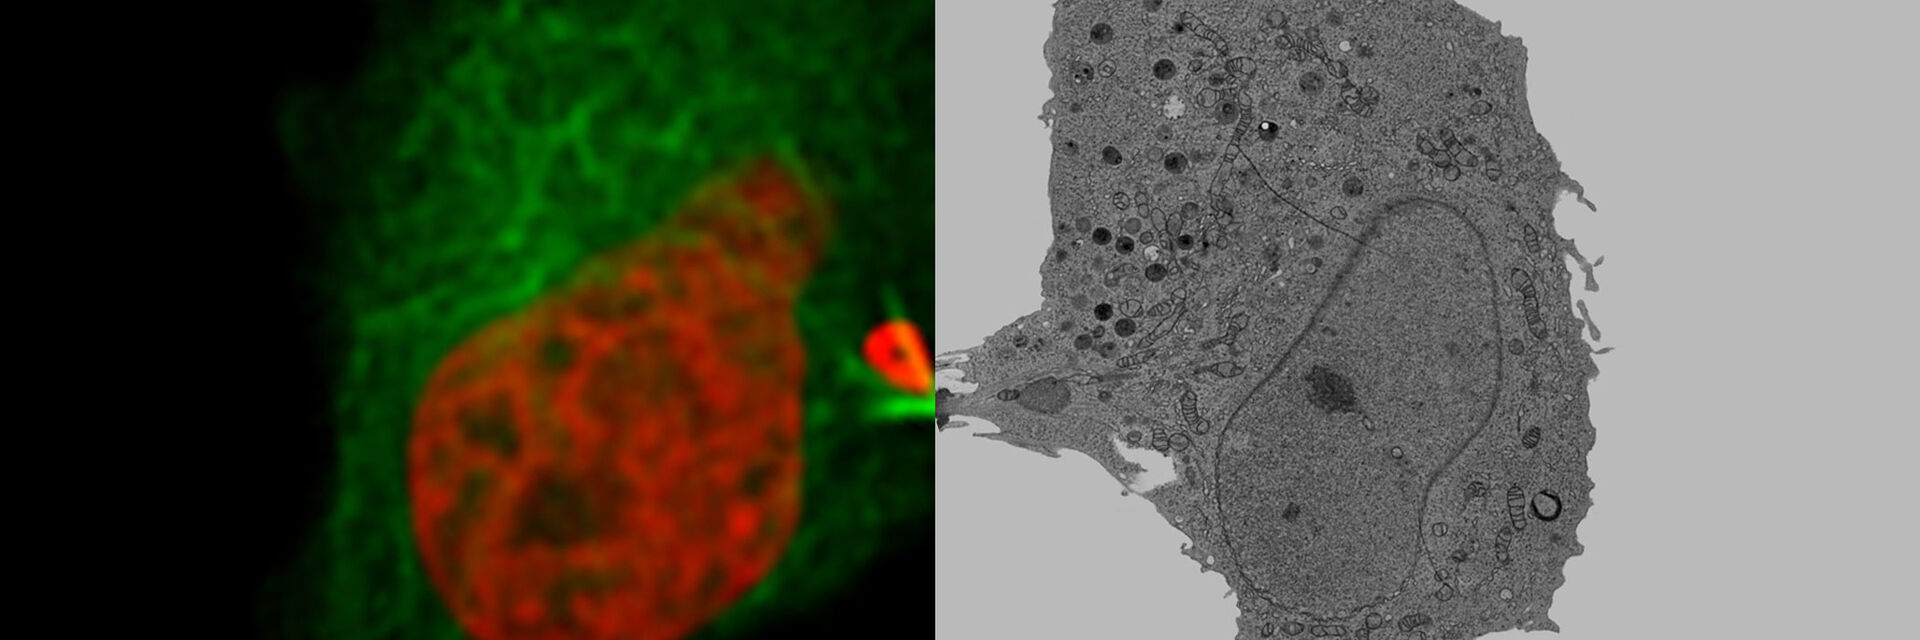 Image collage of a dividing HeLa cell. Left cell shows the fluorescent signals H2B-mCherry and alphaTubulin-mEGFP to visualize microtubules and DNA. The right image shows the corresponding cell, imaged in a transmission electron microscope. 